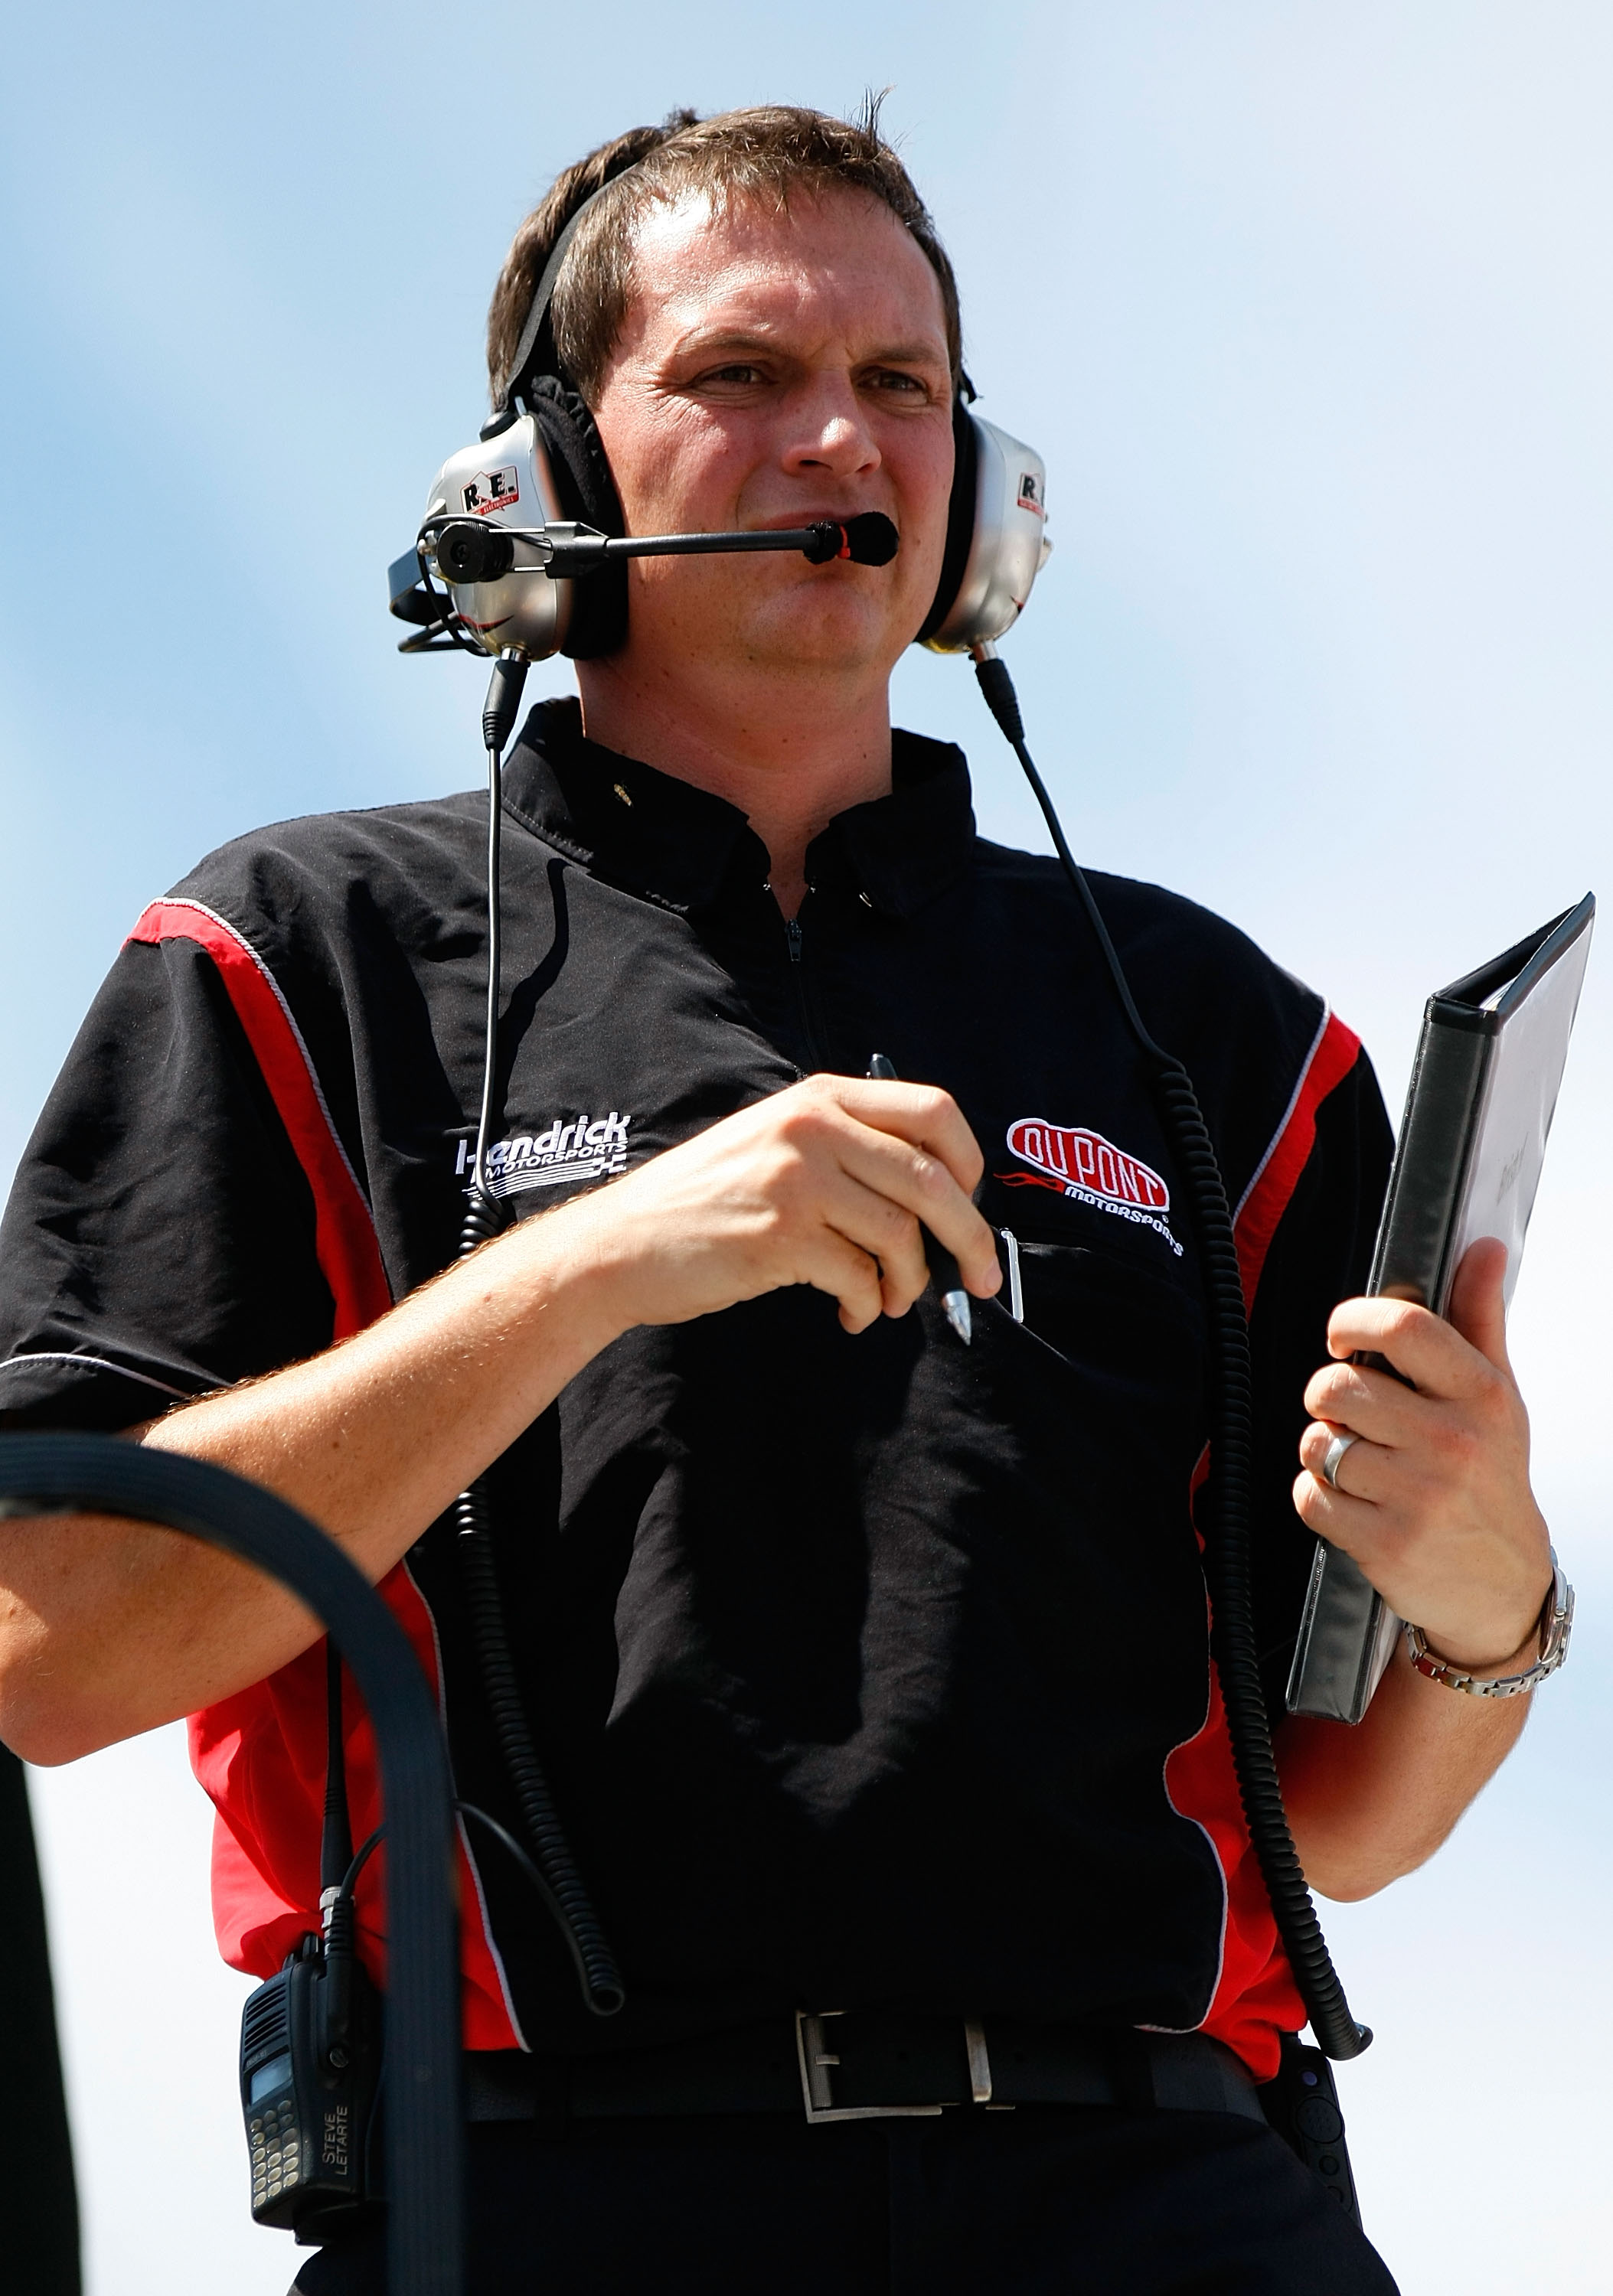 BRISTOL, TN - AUGUST 20: Steve Letarte, crew chief for the #24 DuPont Chevrolet, watches from atop the team hauler during practice for the NASCAR Sprint Cup Series IRWIN Tools Night Race at Bristol Motor Speedway on August 20, 2010 in Bristol, Tennessee.